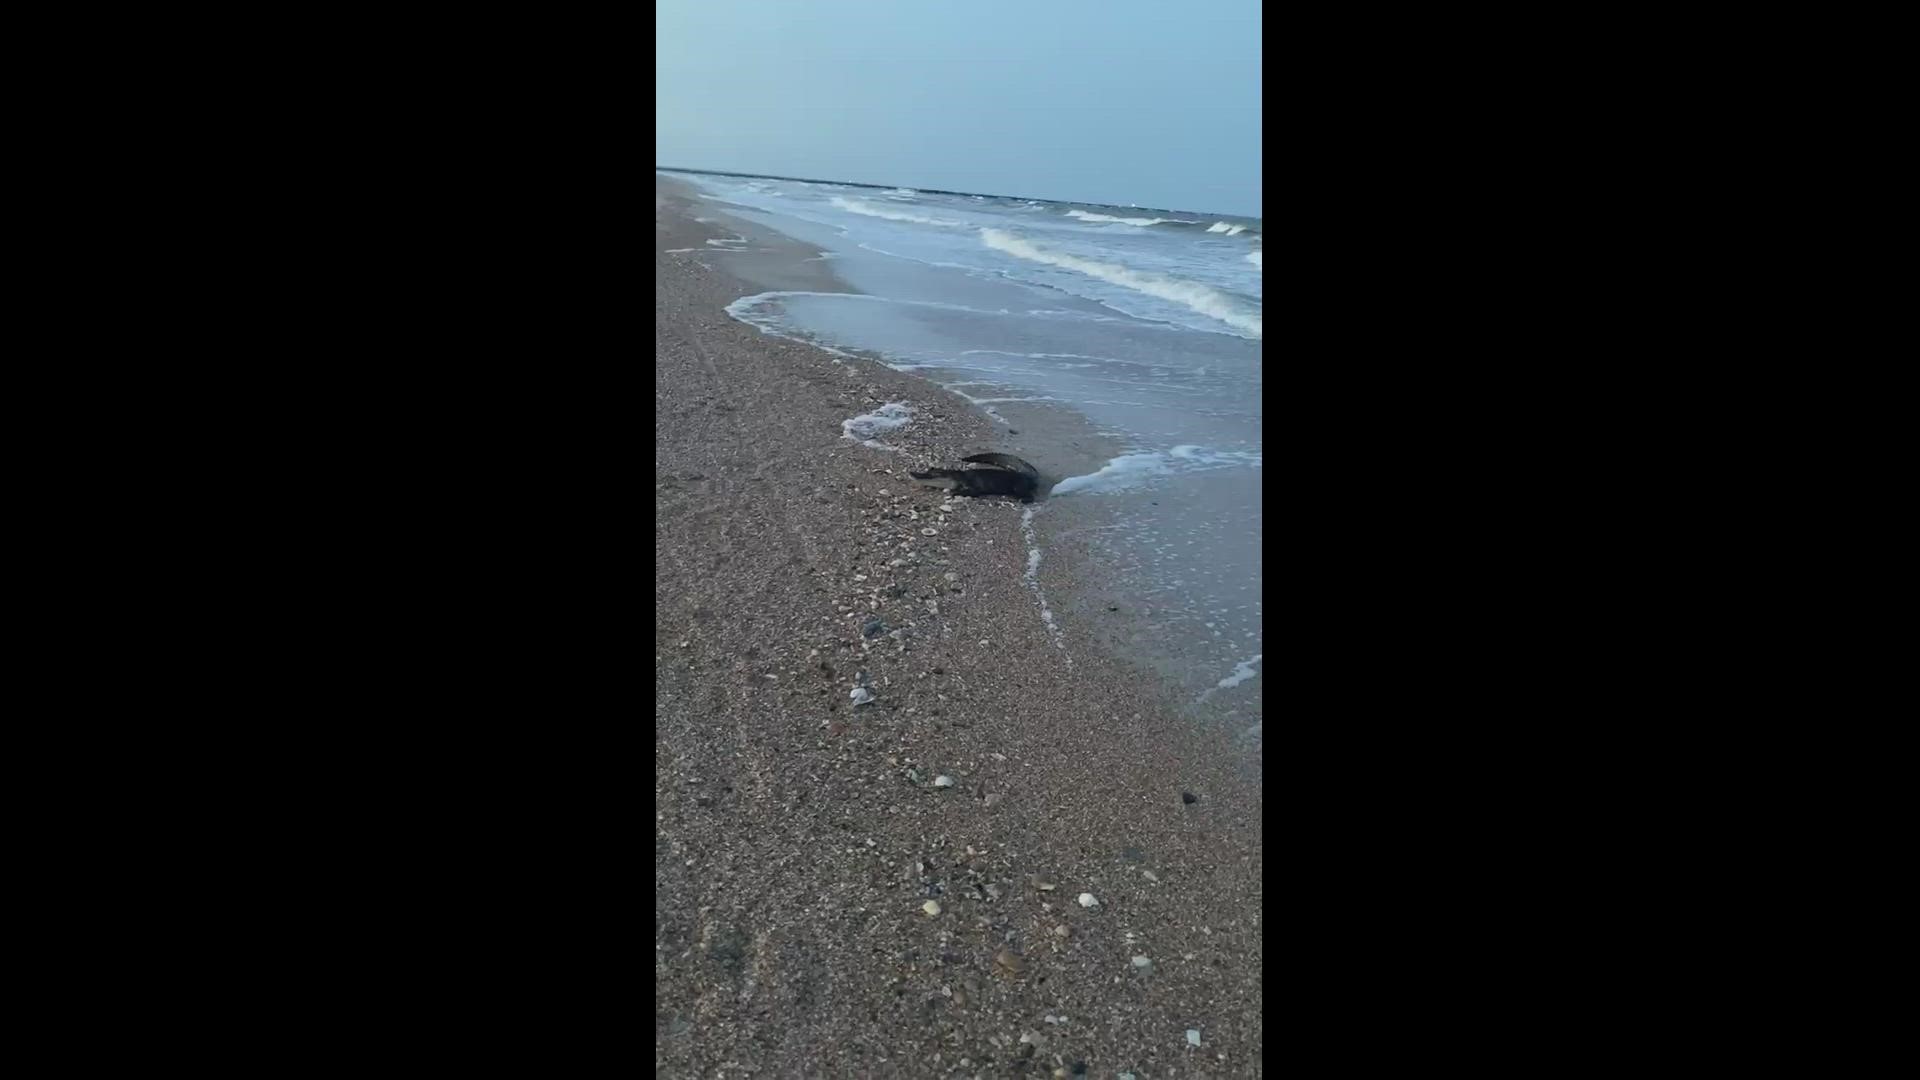 "We walked from the beach side all the way to [Fort Clinch] and we saw him right at the end," Bruna Costa said on Facebook.